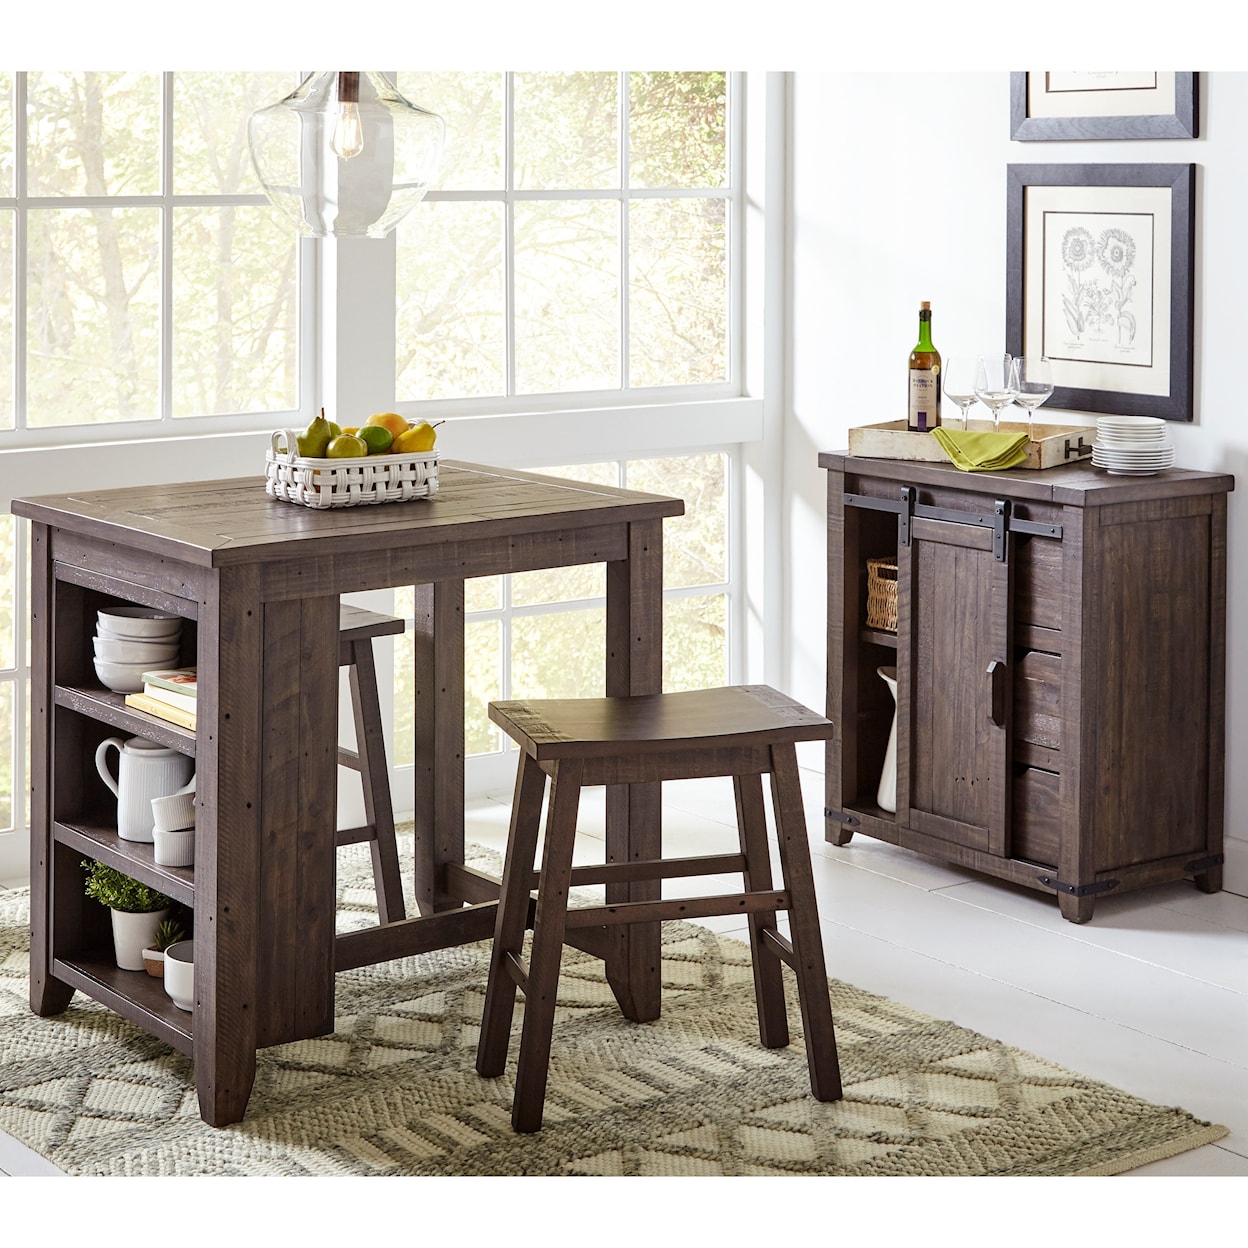 Jofran Madison County 3 Piece Counter Height Table Set